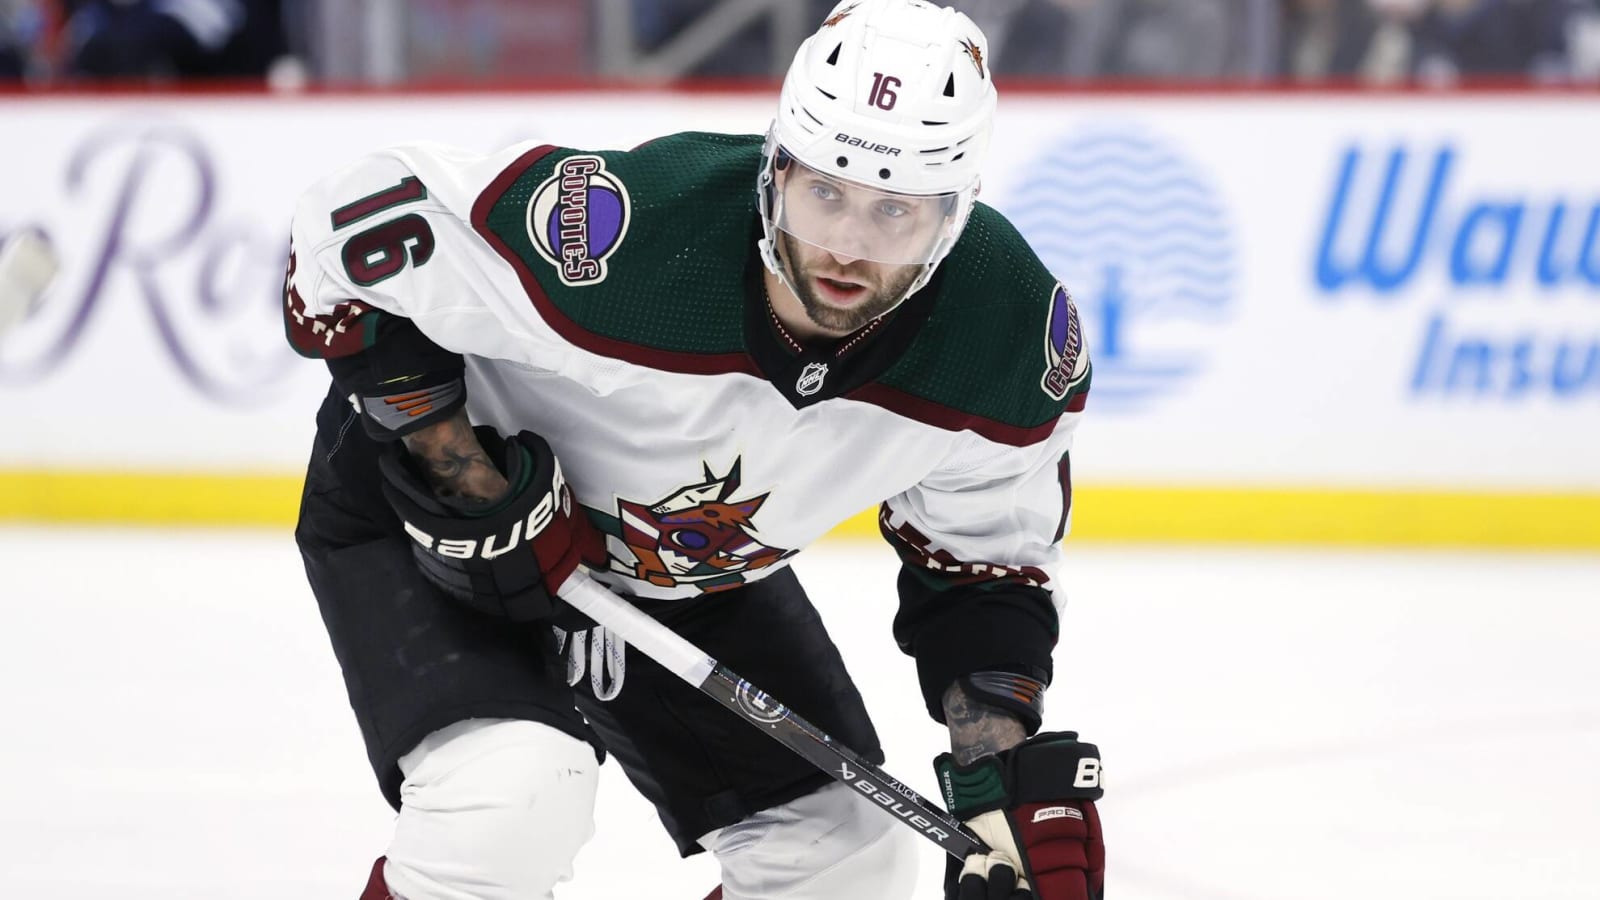 Lots of teams, including the Canucks, in on Jason Zucker ahead of NHL trade deadline: report